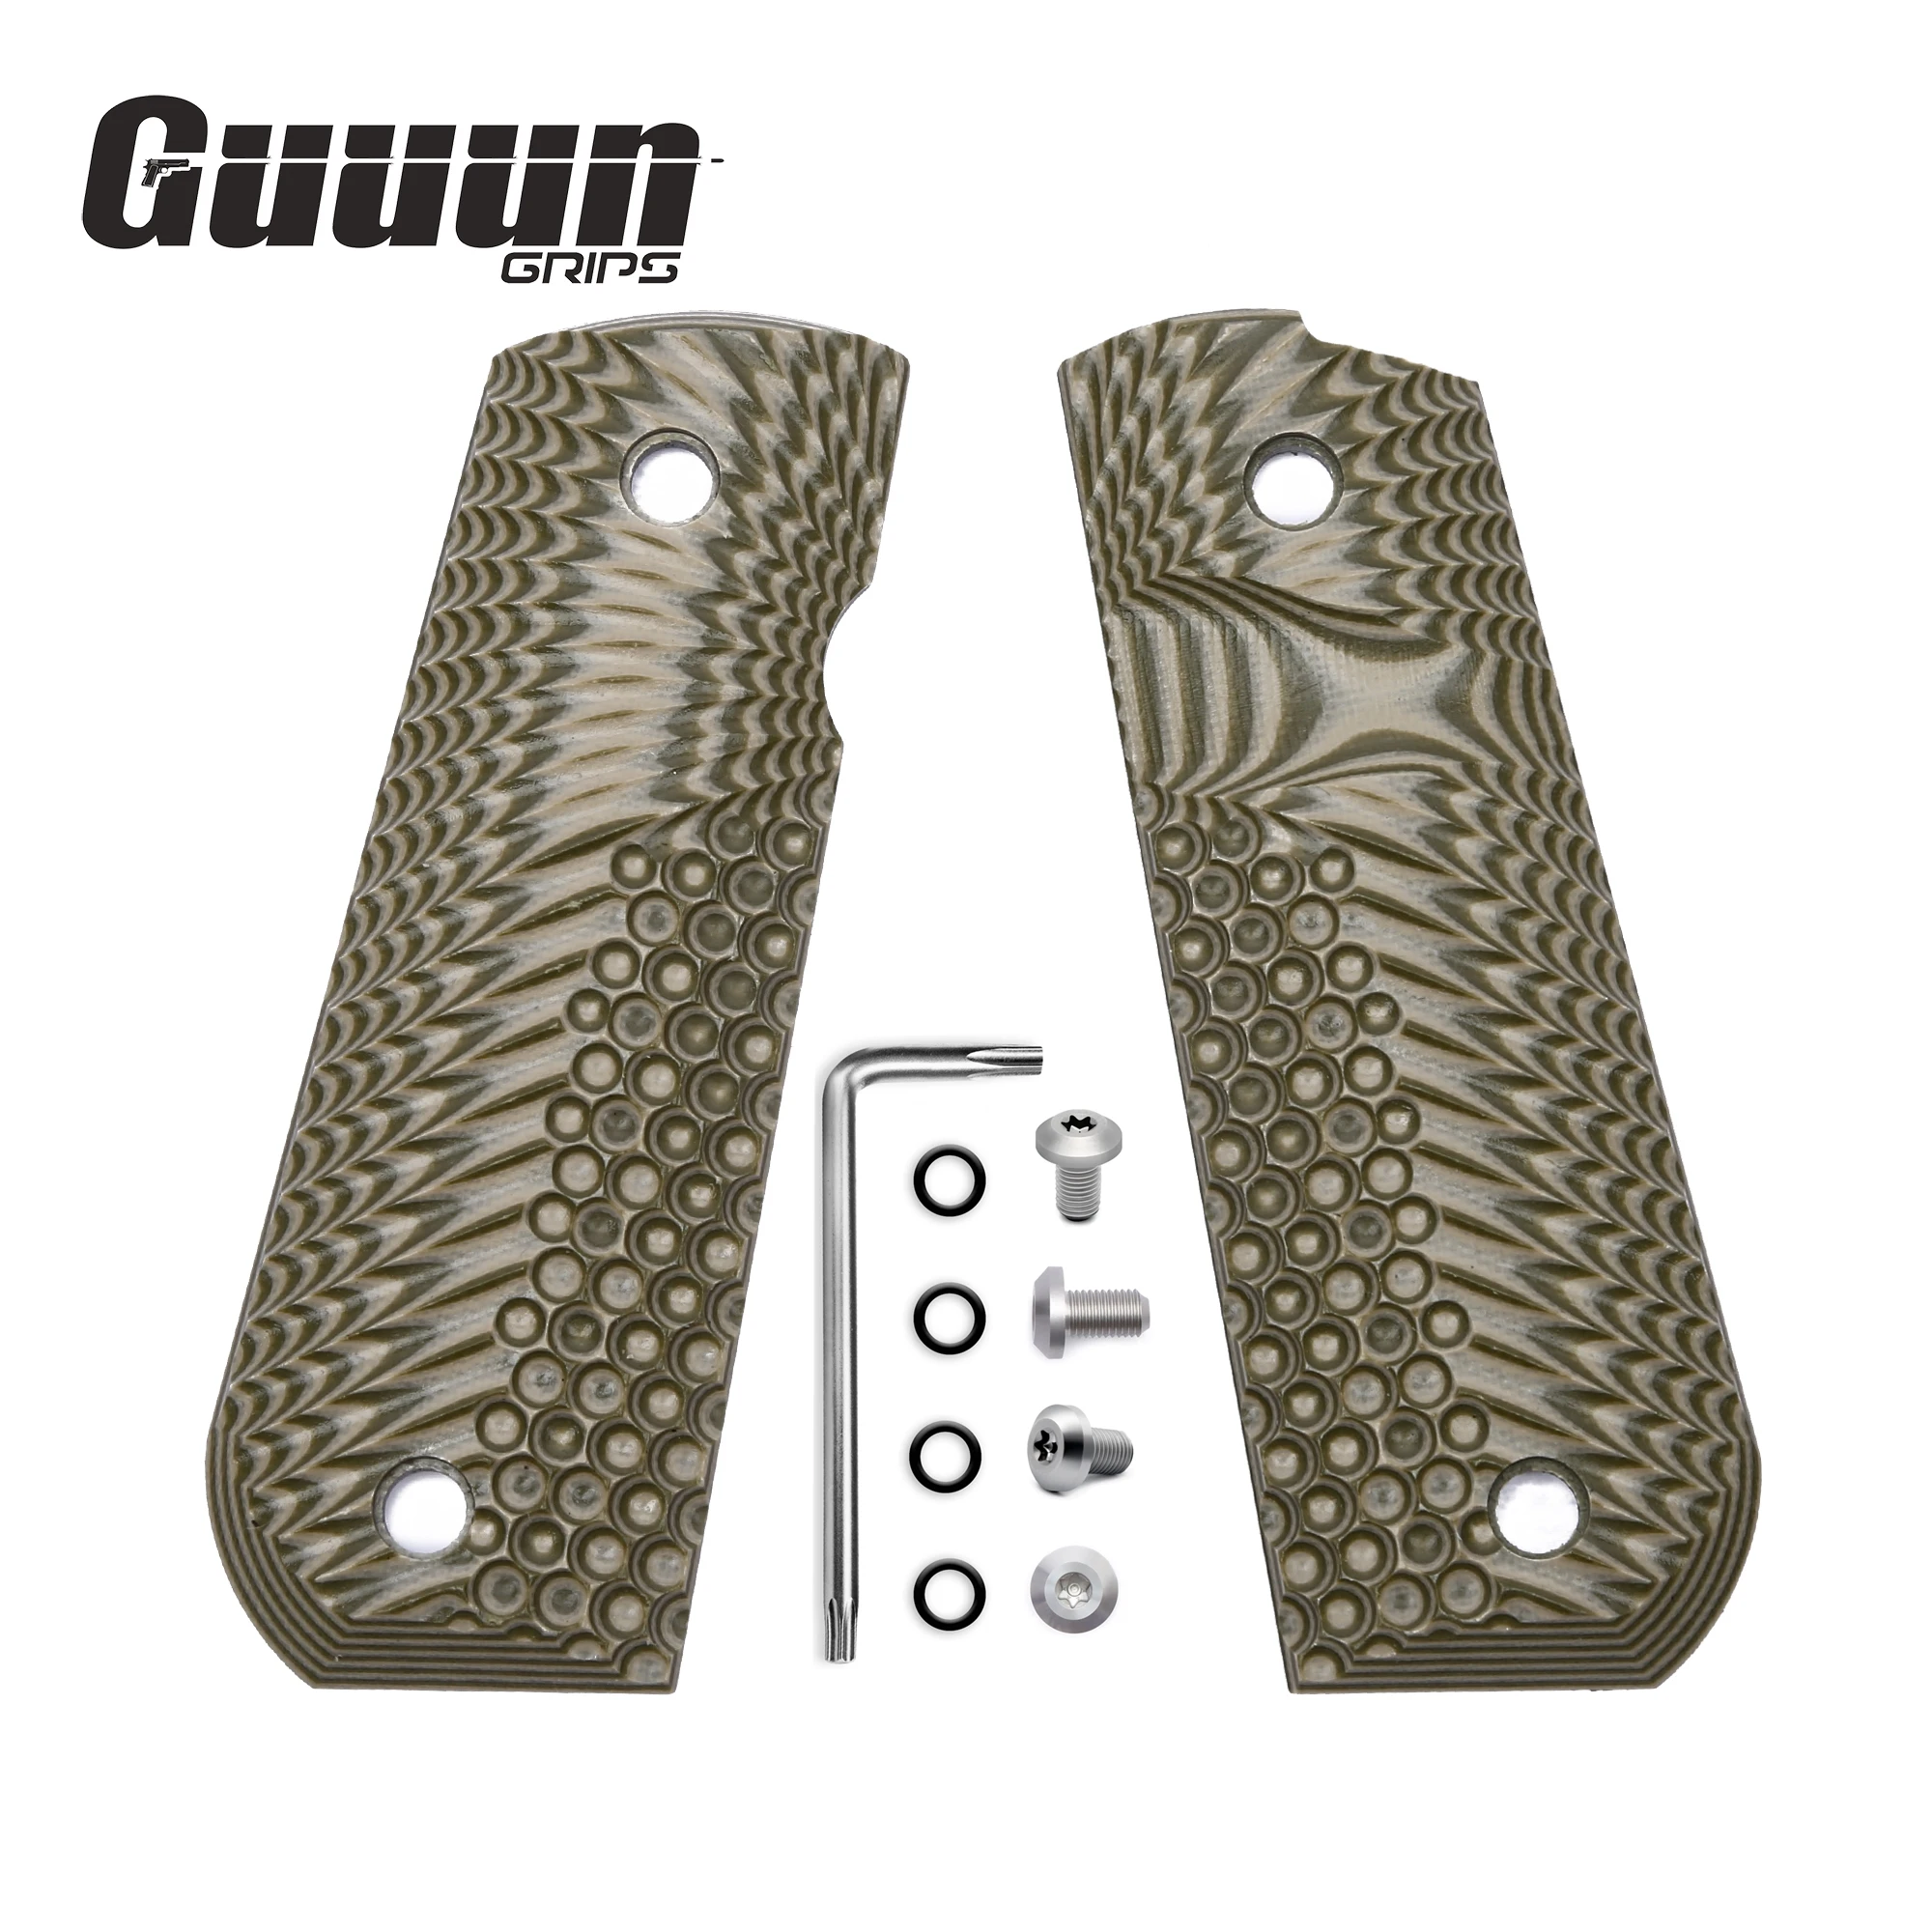 Guuun 1911 Grips G10, Full Size Government Grips, Eagle Wing Golf Texture